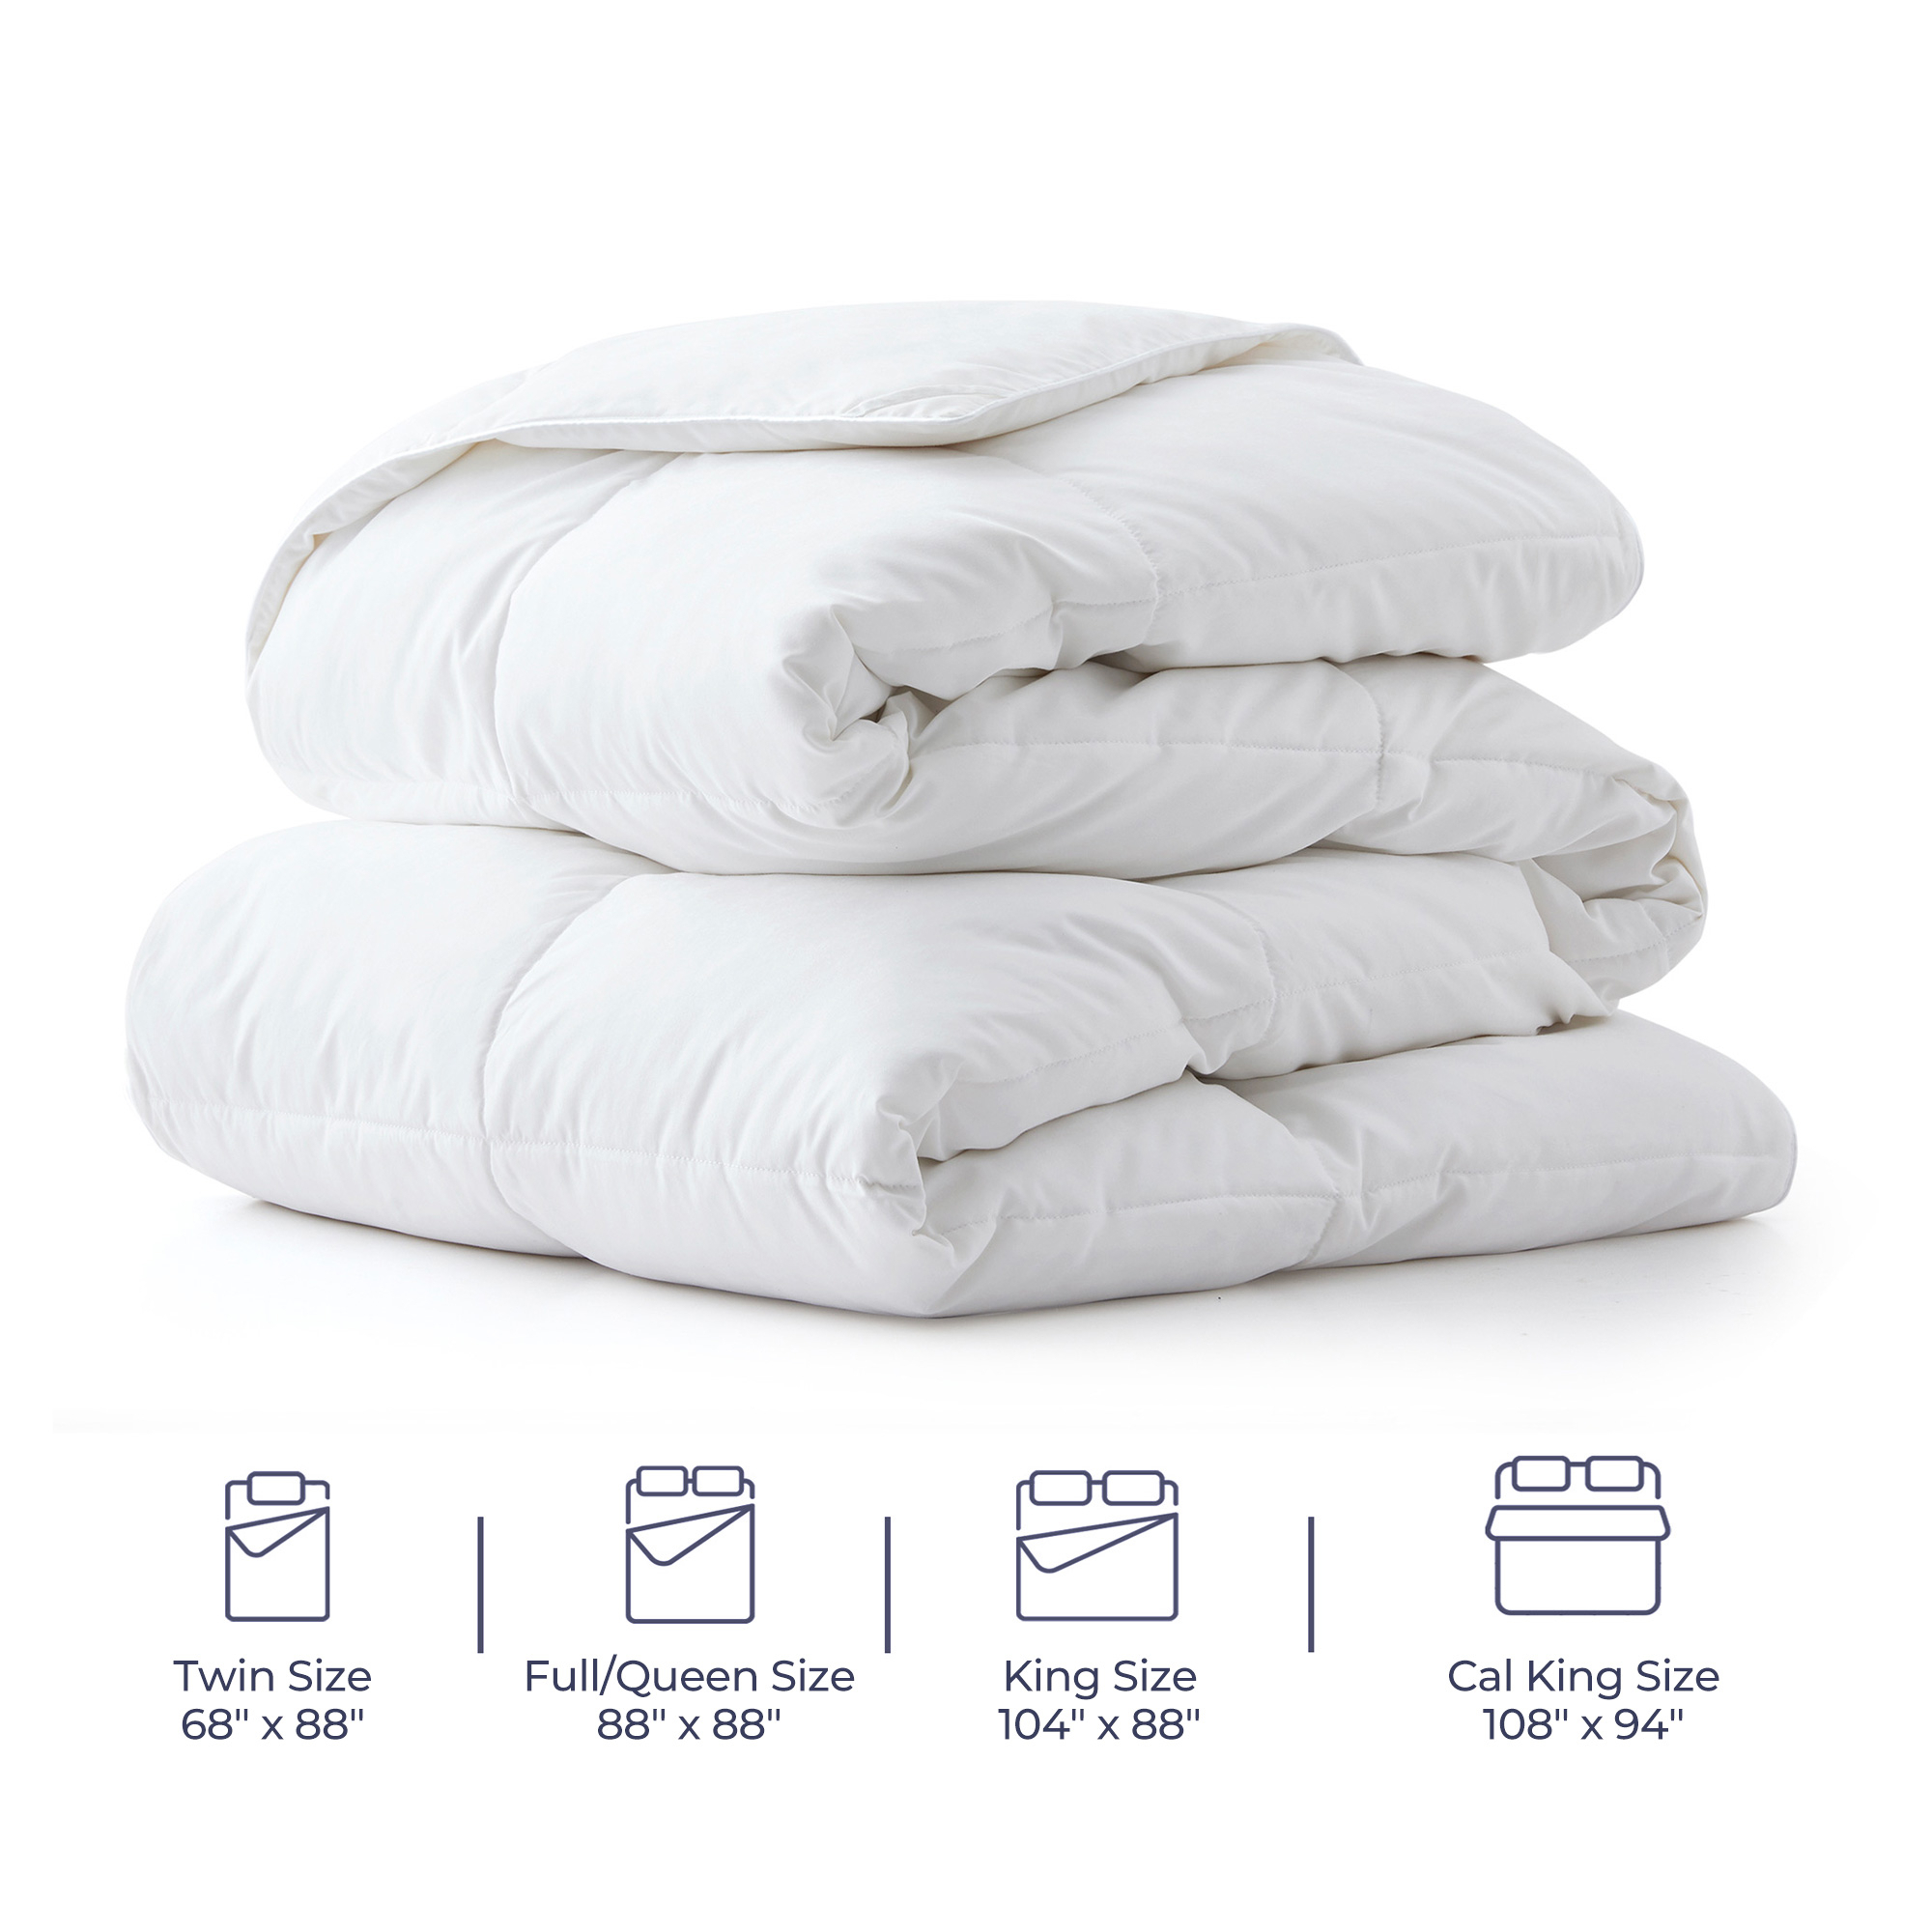 All Seasons White Goose Feather Comforter - Luxurious And Versatile Duvet Insert - Twin